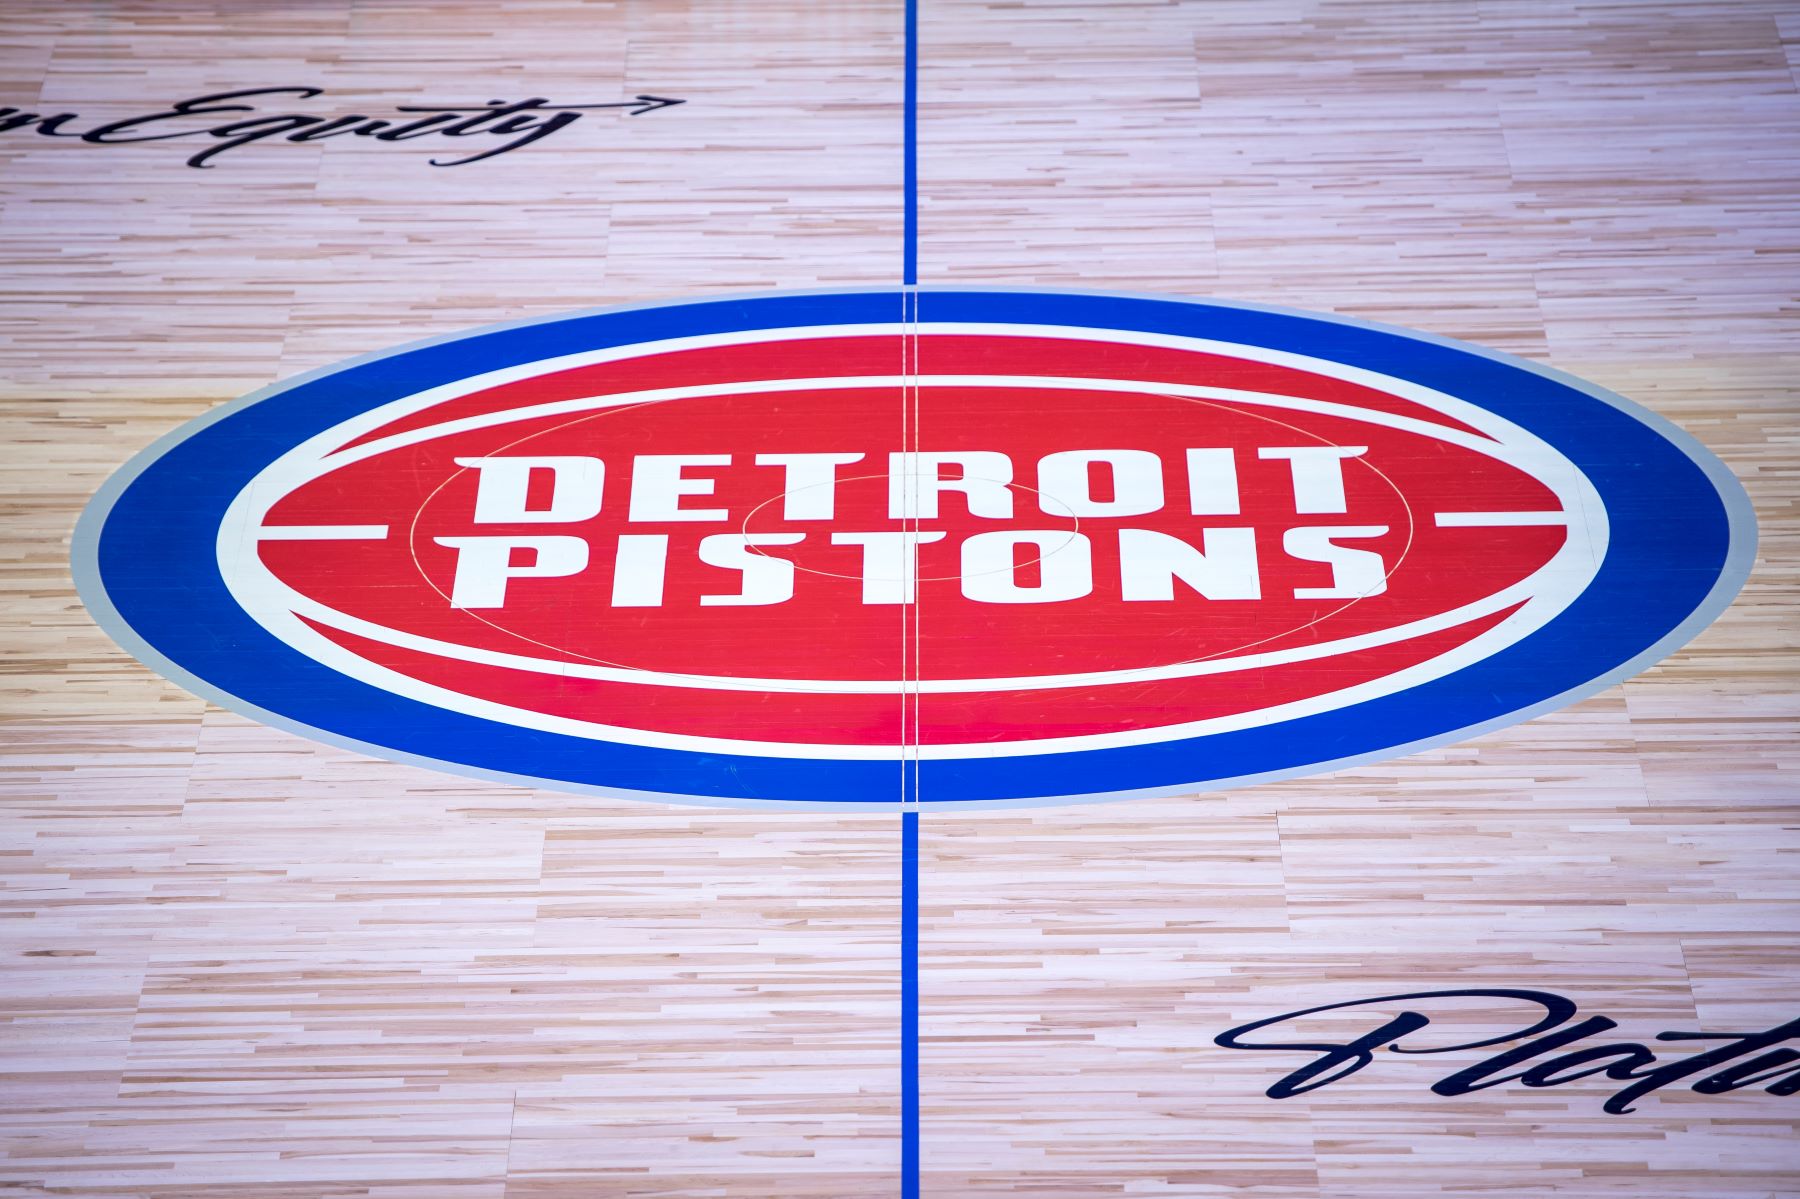 NBA team Detroit Pistons logo on the court before a game against the Orlando Magic